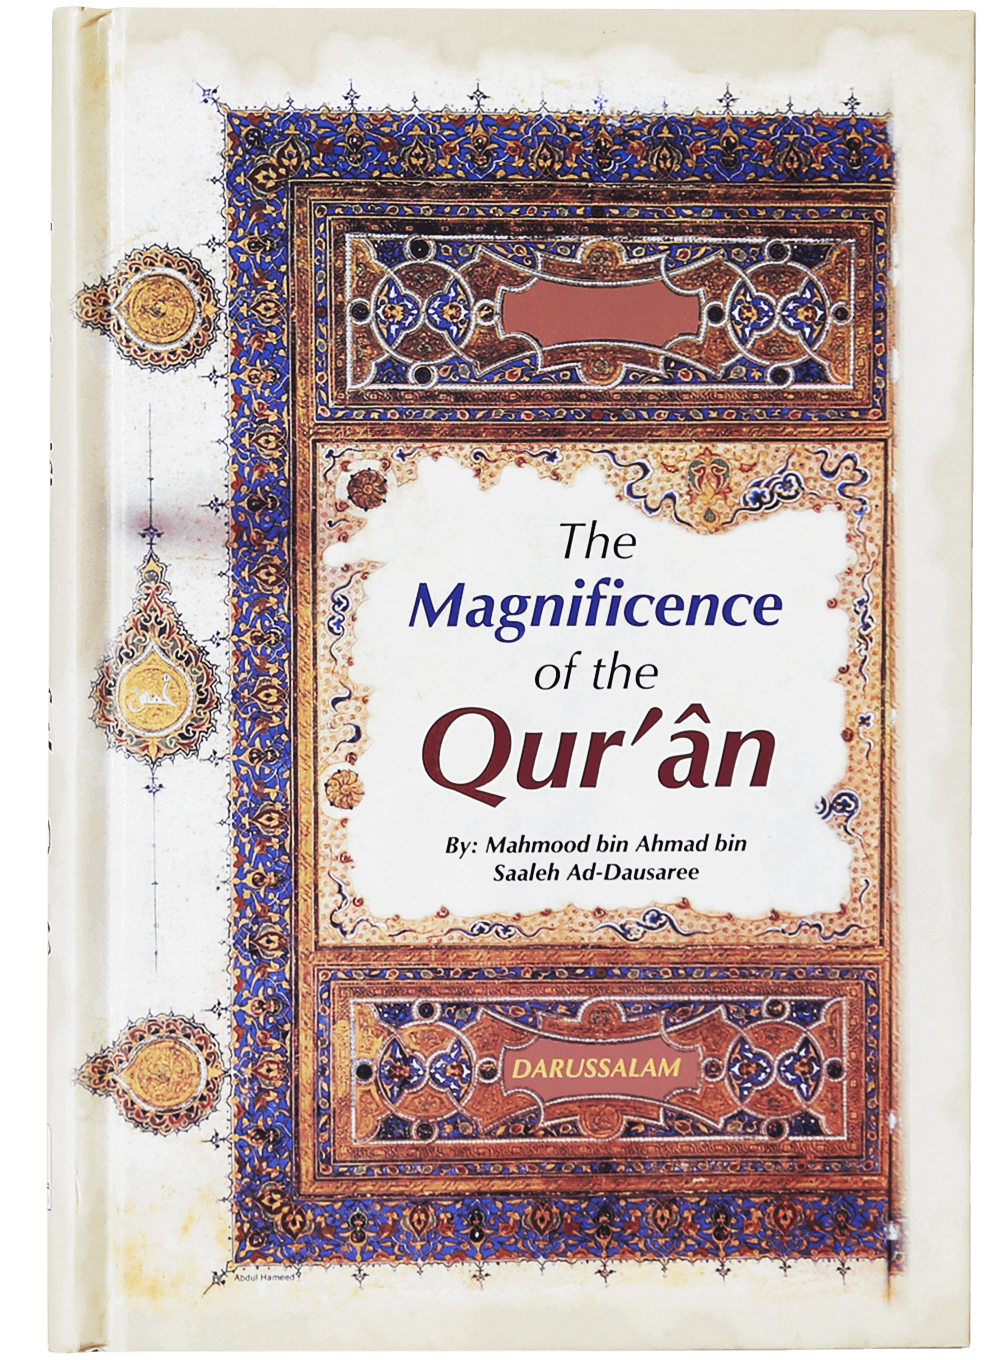 darussalam-2017-08-08-15-29-08the-magnificence-of-the-quran-(1)